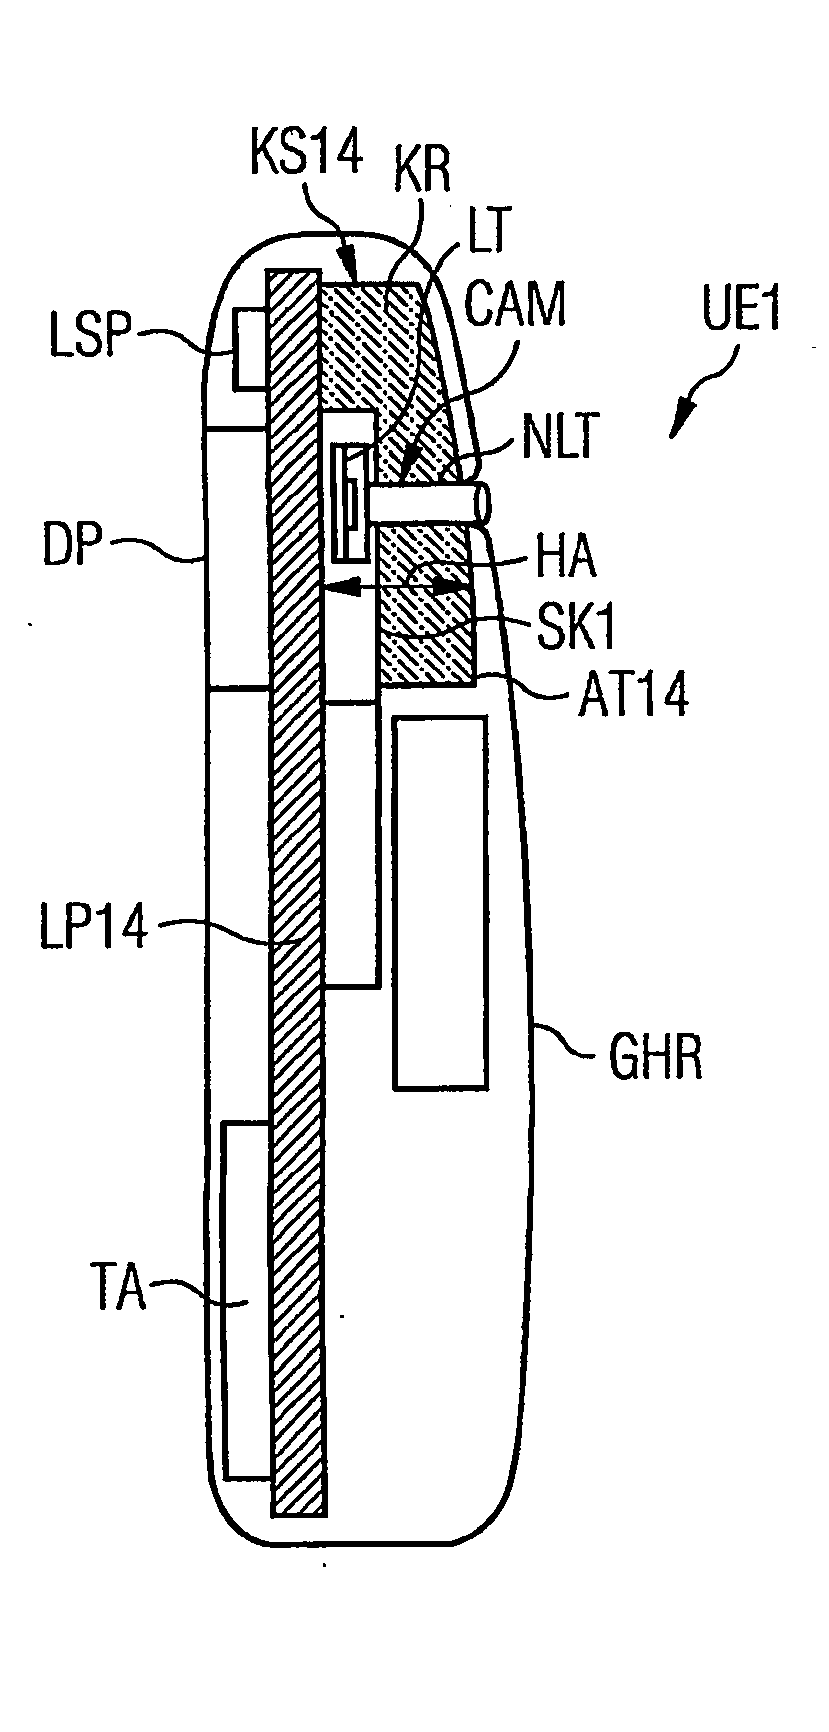 Radio communication device and associated coupling structure comprising at least one conductor board and at least one flat antenna coupled thereto